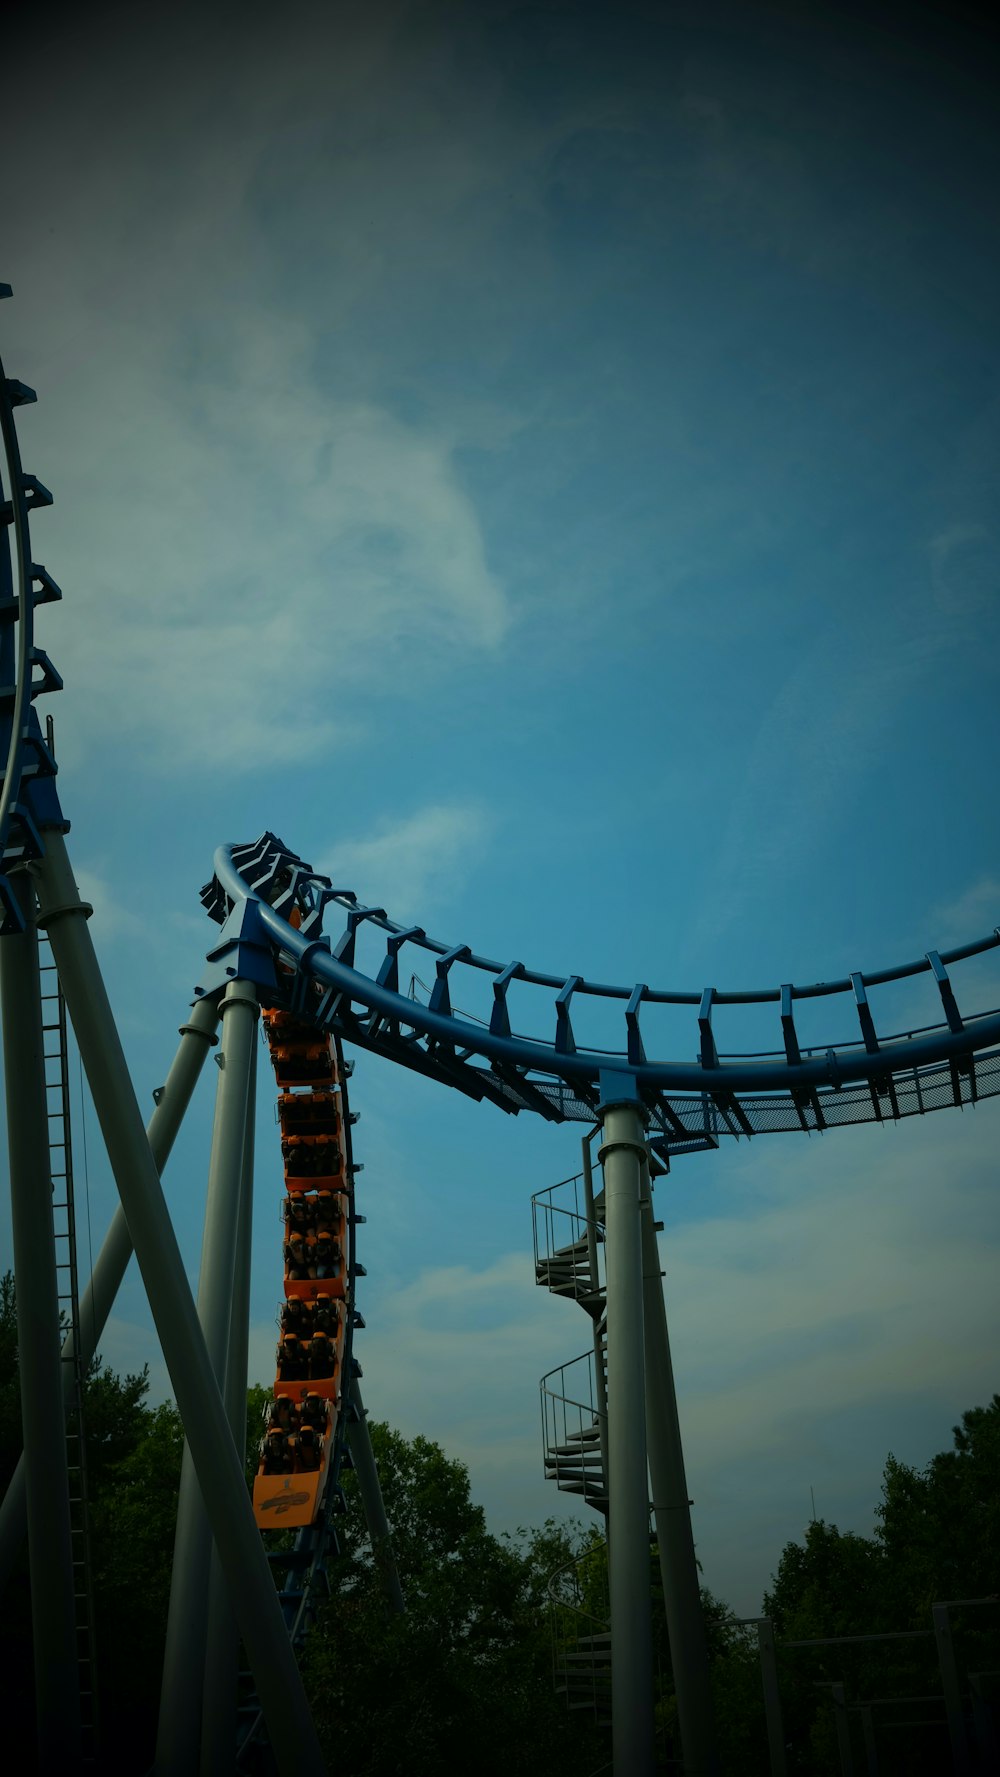 a roller coaster with trees and blue sky